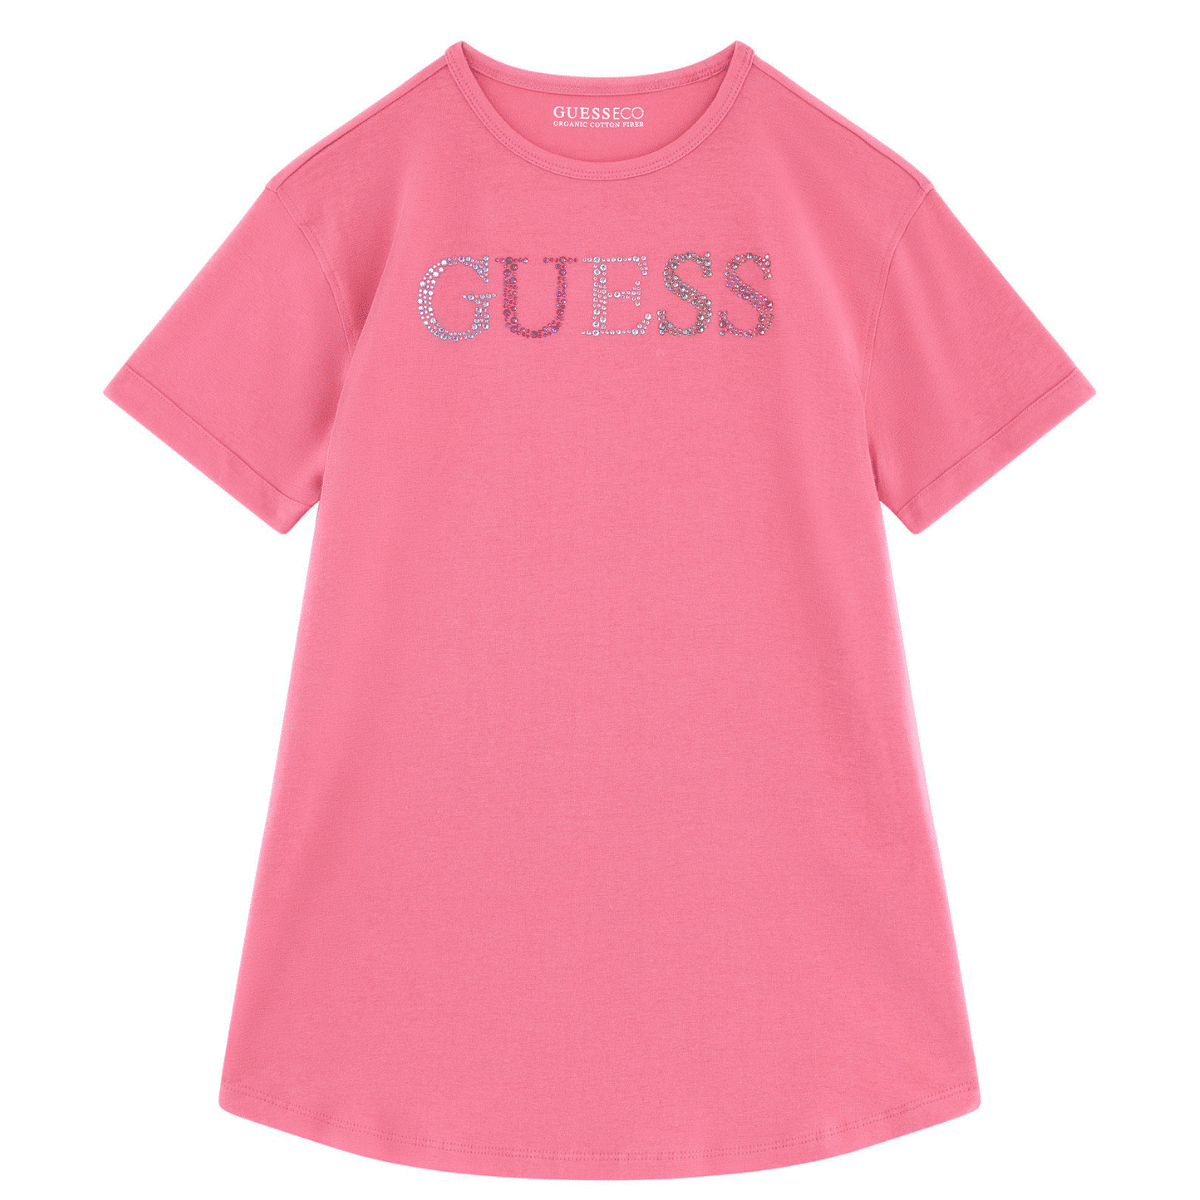 guess girls pink tshirt with sequinned logo